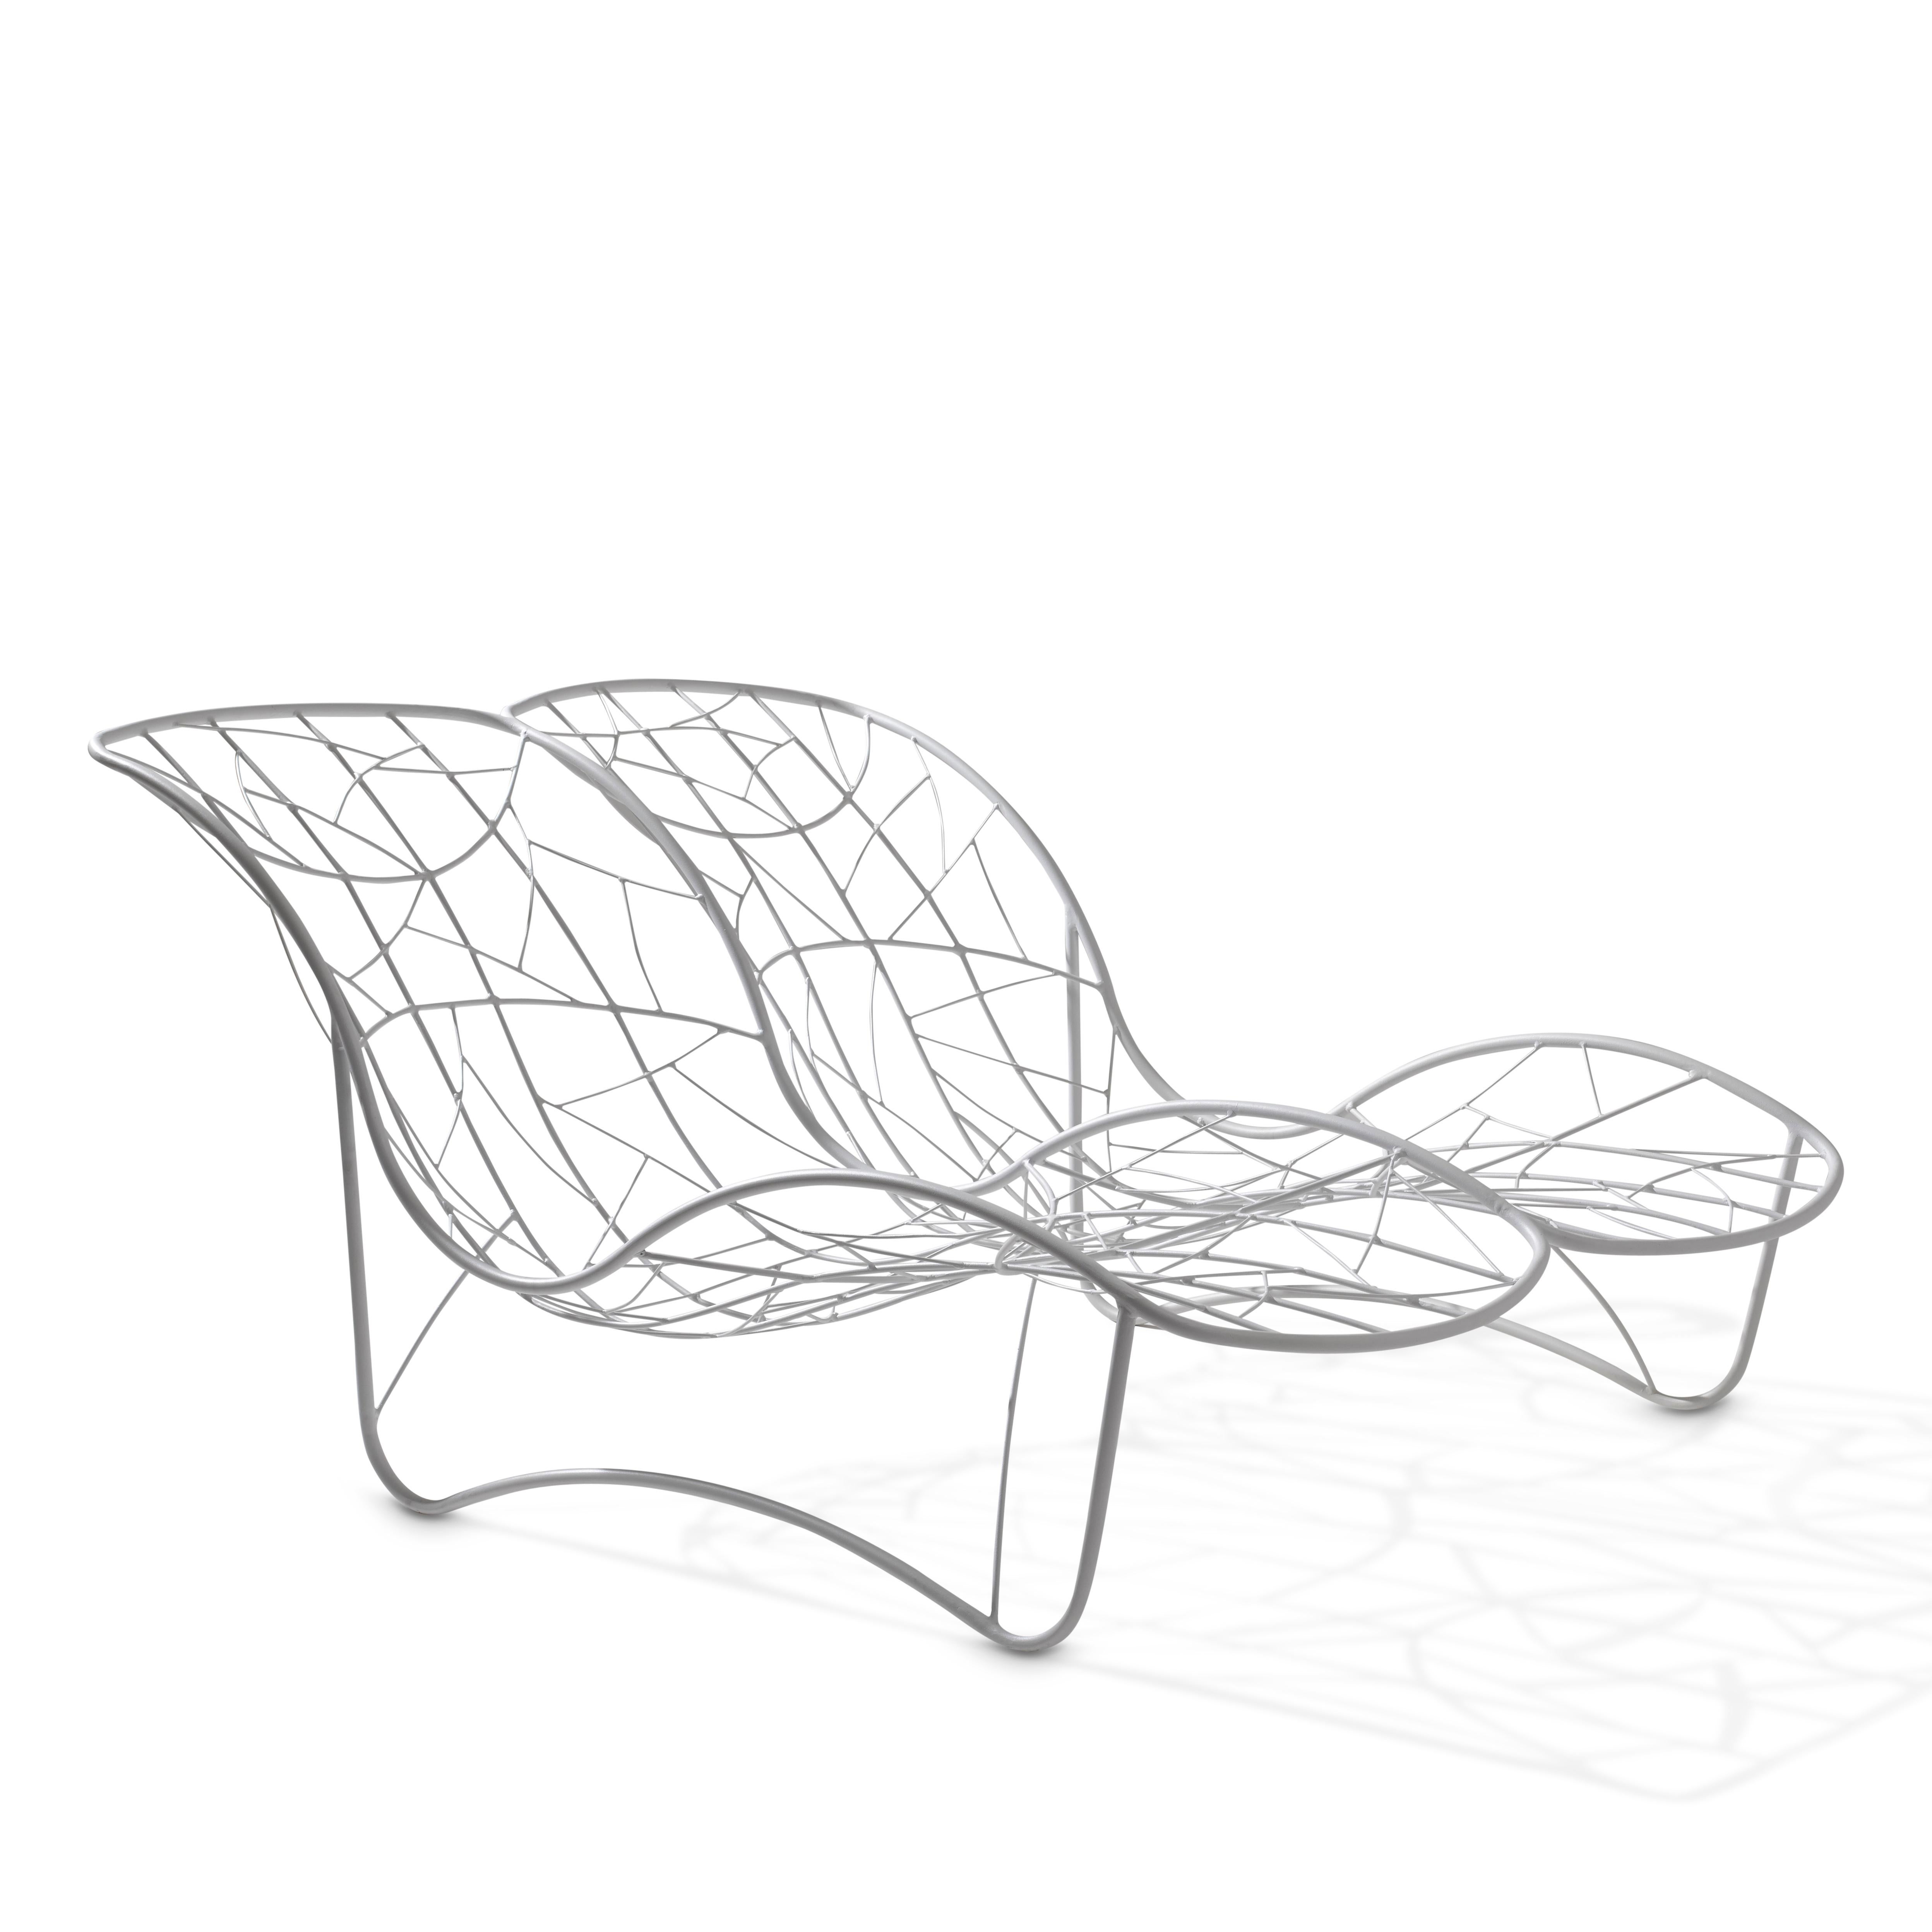 The recliner hanging swing chair is sculptural and dynamic. Fluid and organic, they lend themselves for use as functional art pieces. The chair shape is inspired by the Cape Cobra and the pattern detail is reminiscent of the veins in leaves, tree